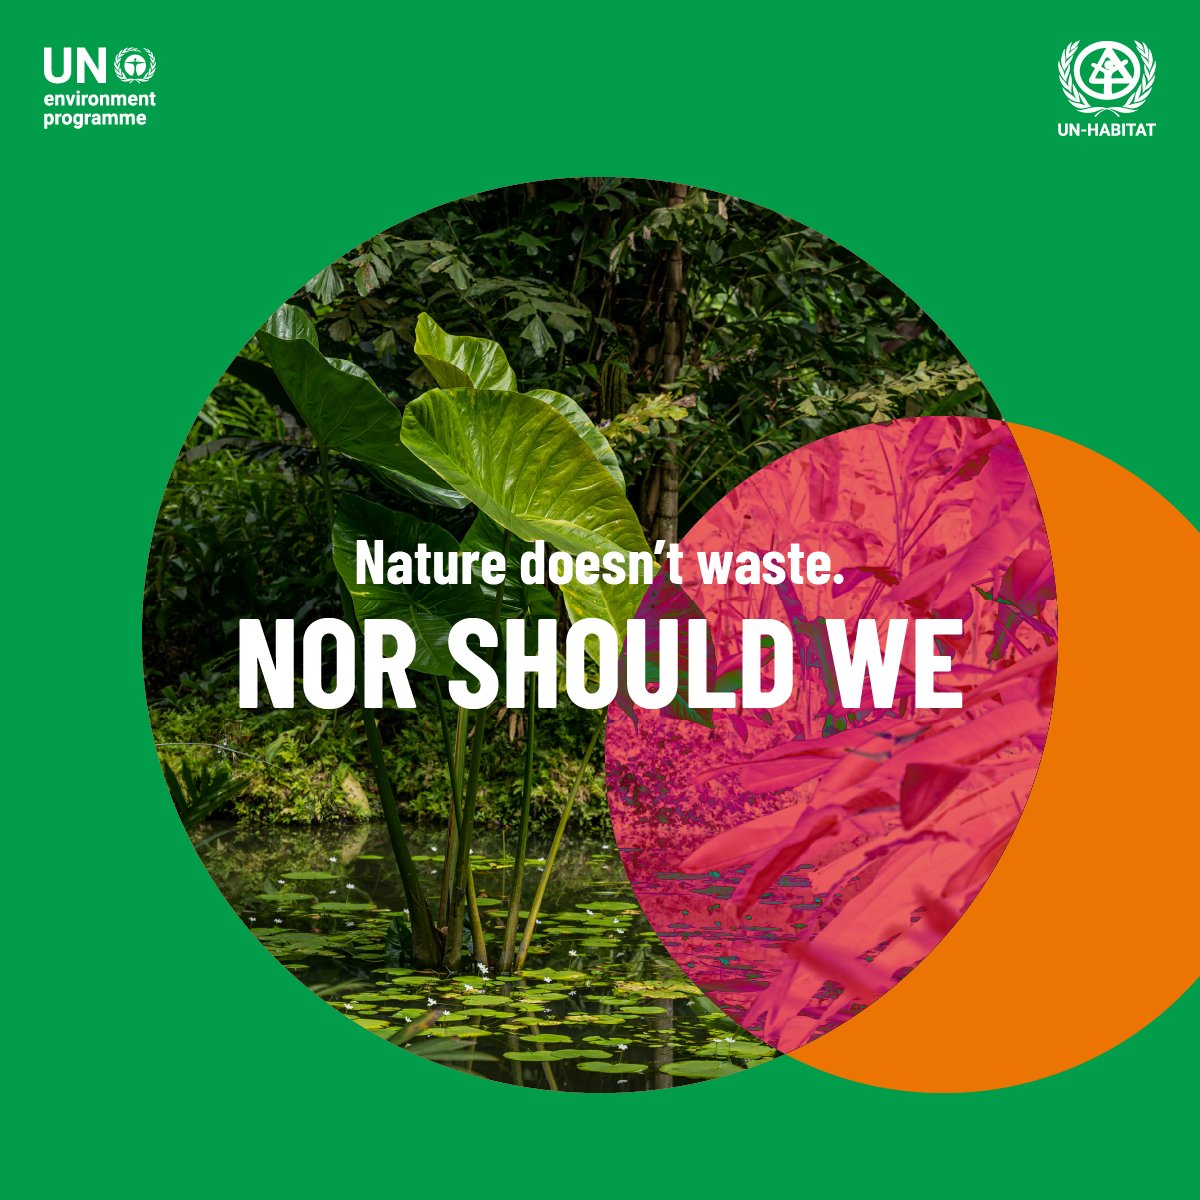 🌱 Nature doesn’t waste. Nor should we. Yet, without urgent action, humanity will produce 3.8 billion tonnes of waste a year by 2050. Here’s what you need to know about the global waste crisis and ways to tackle it. 🔗 unep.org/events/un-day/…